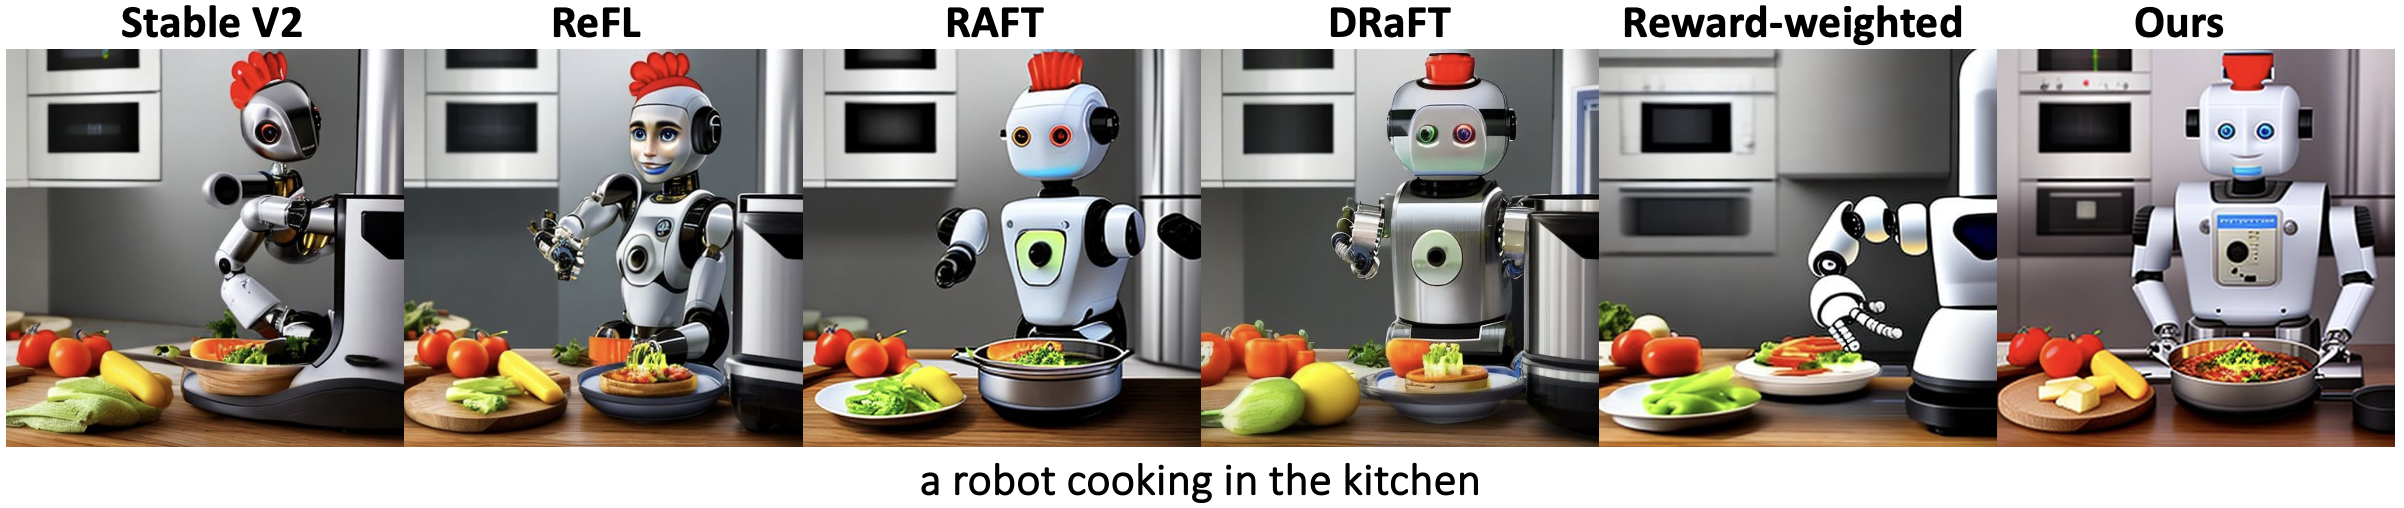 A robot cooking in the kitchen